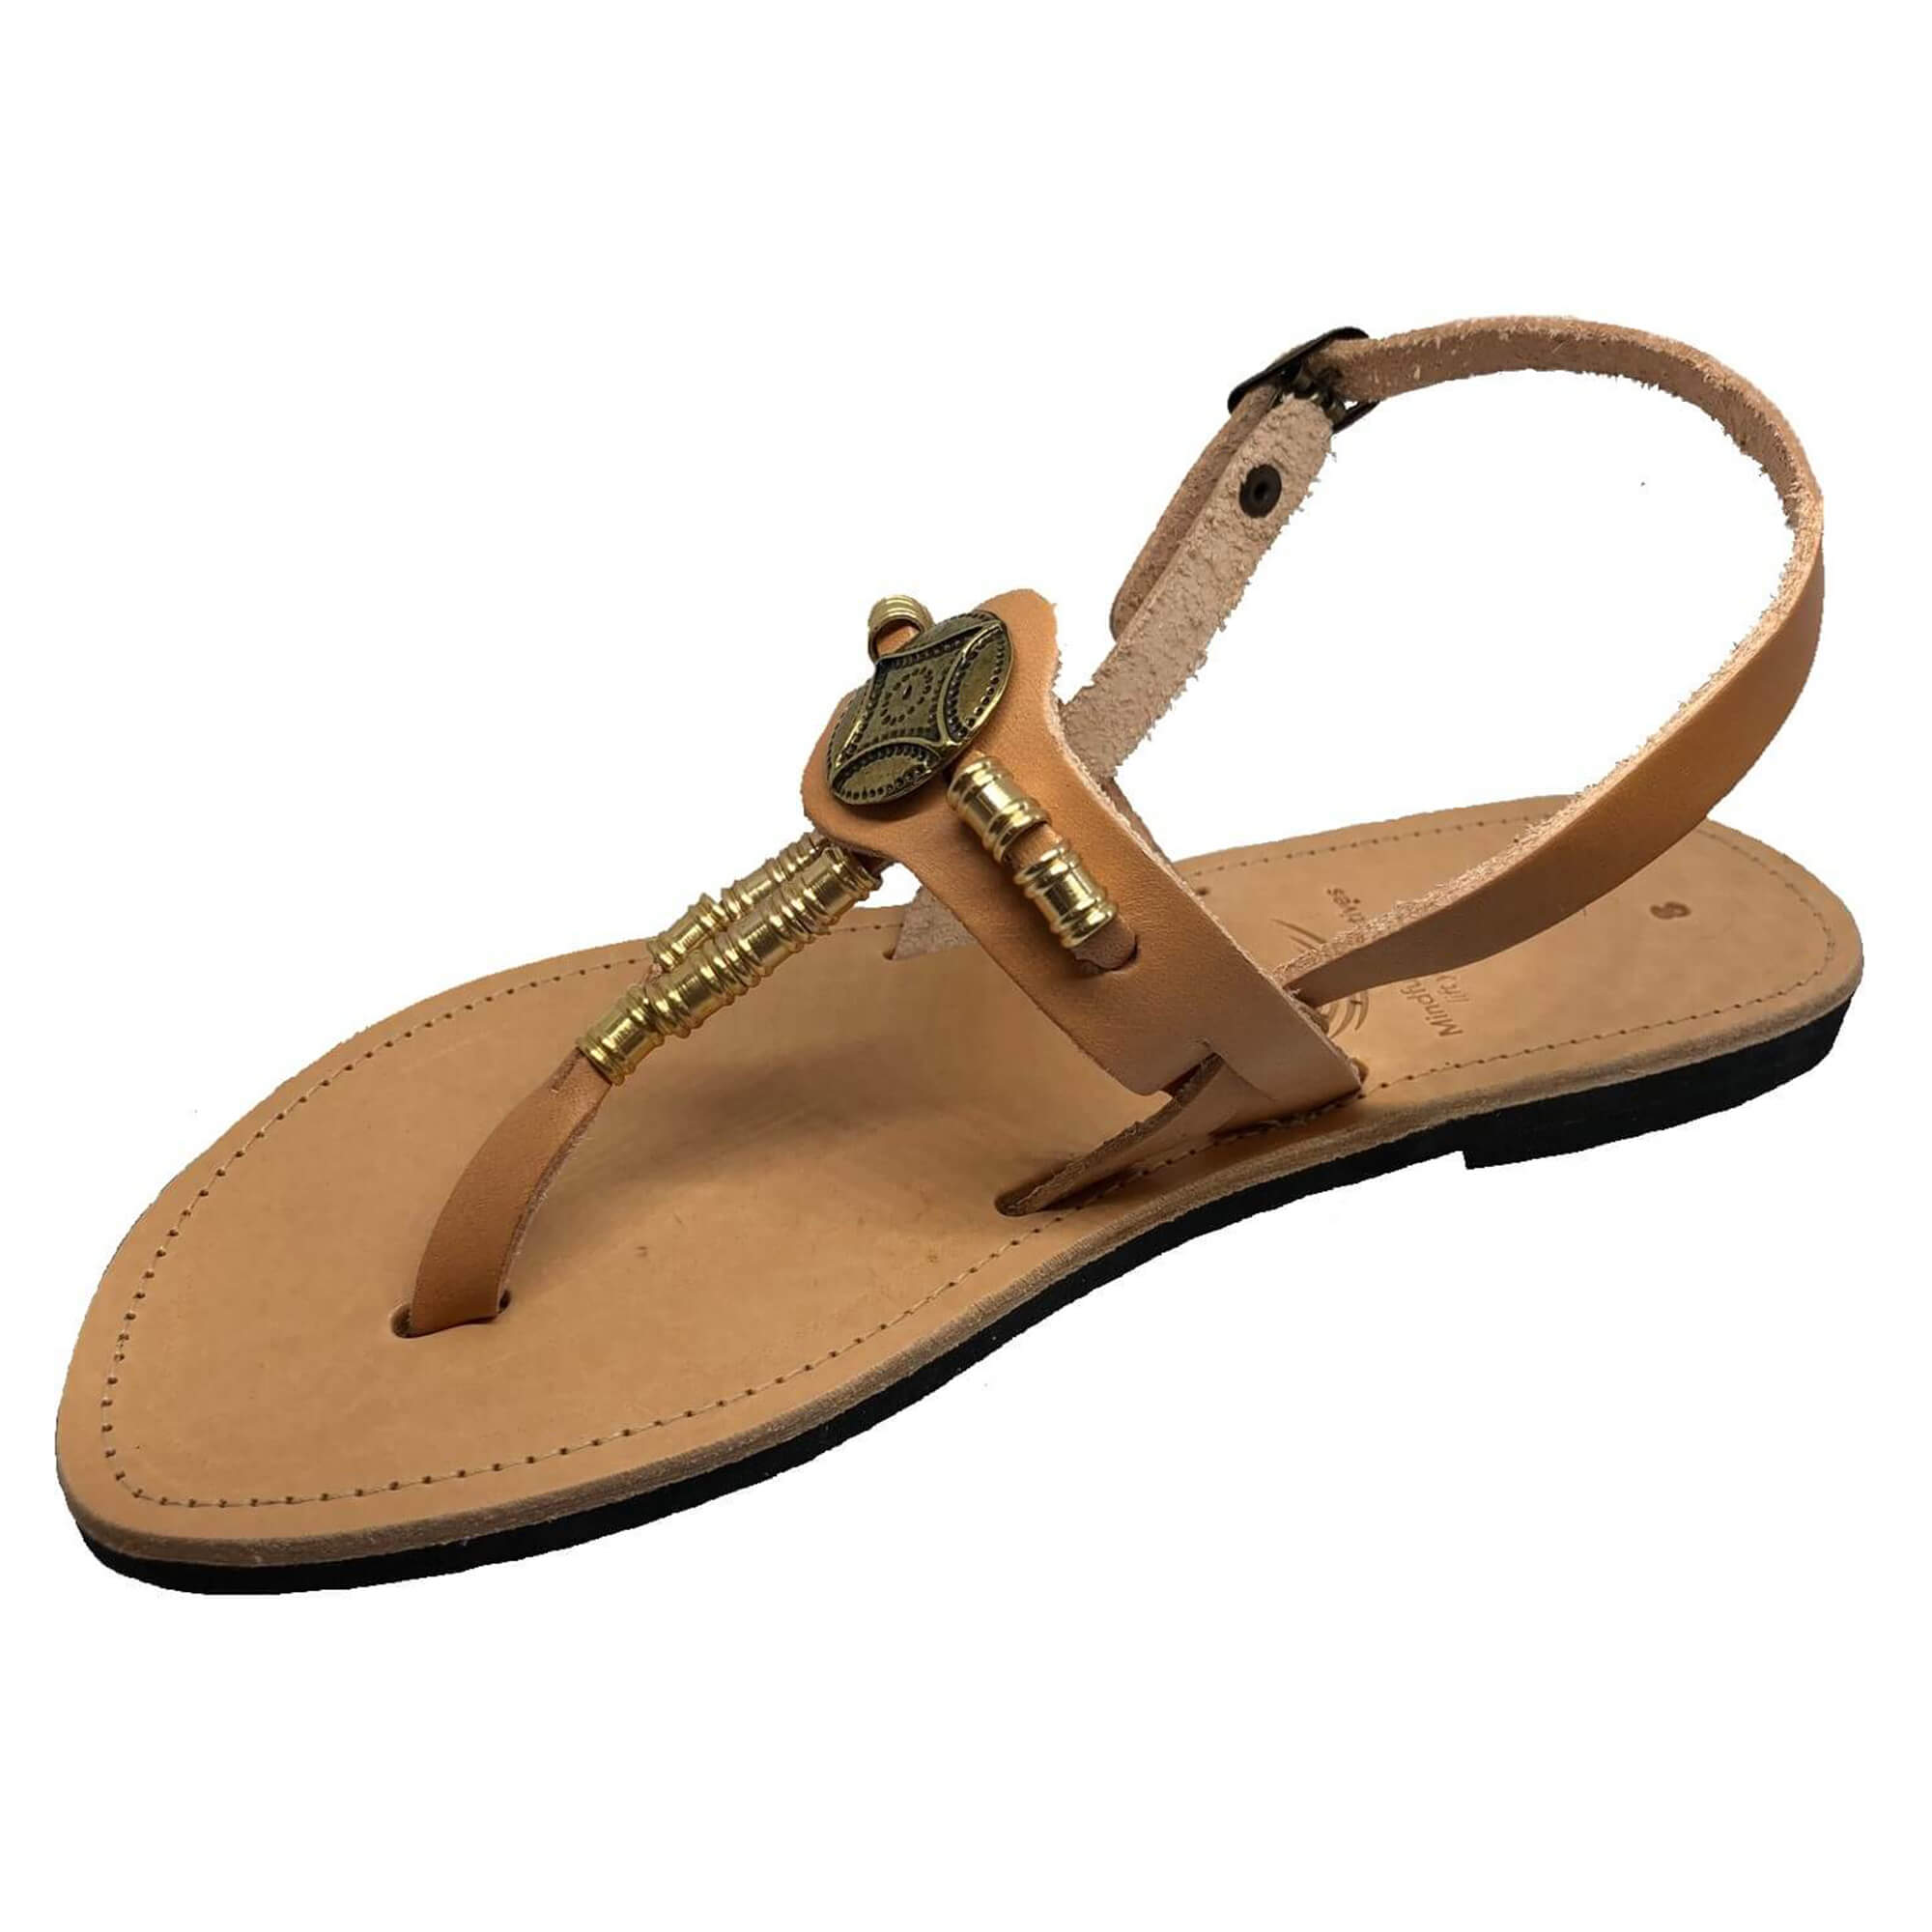  Handmade  Tan Leather  Sandals  from Greece Mindful Collectives